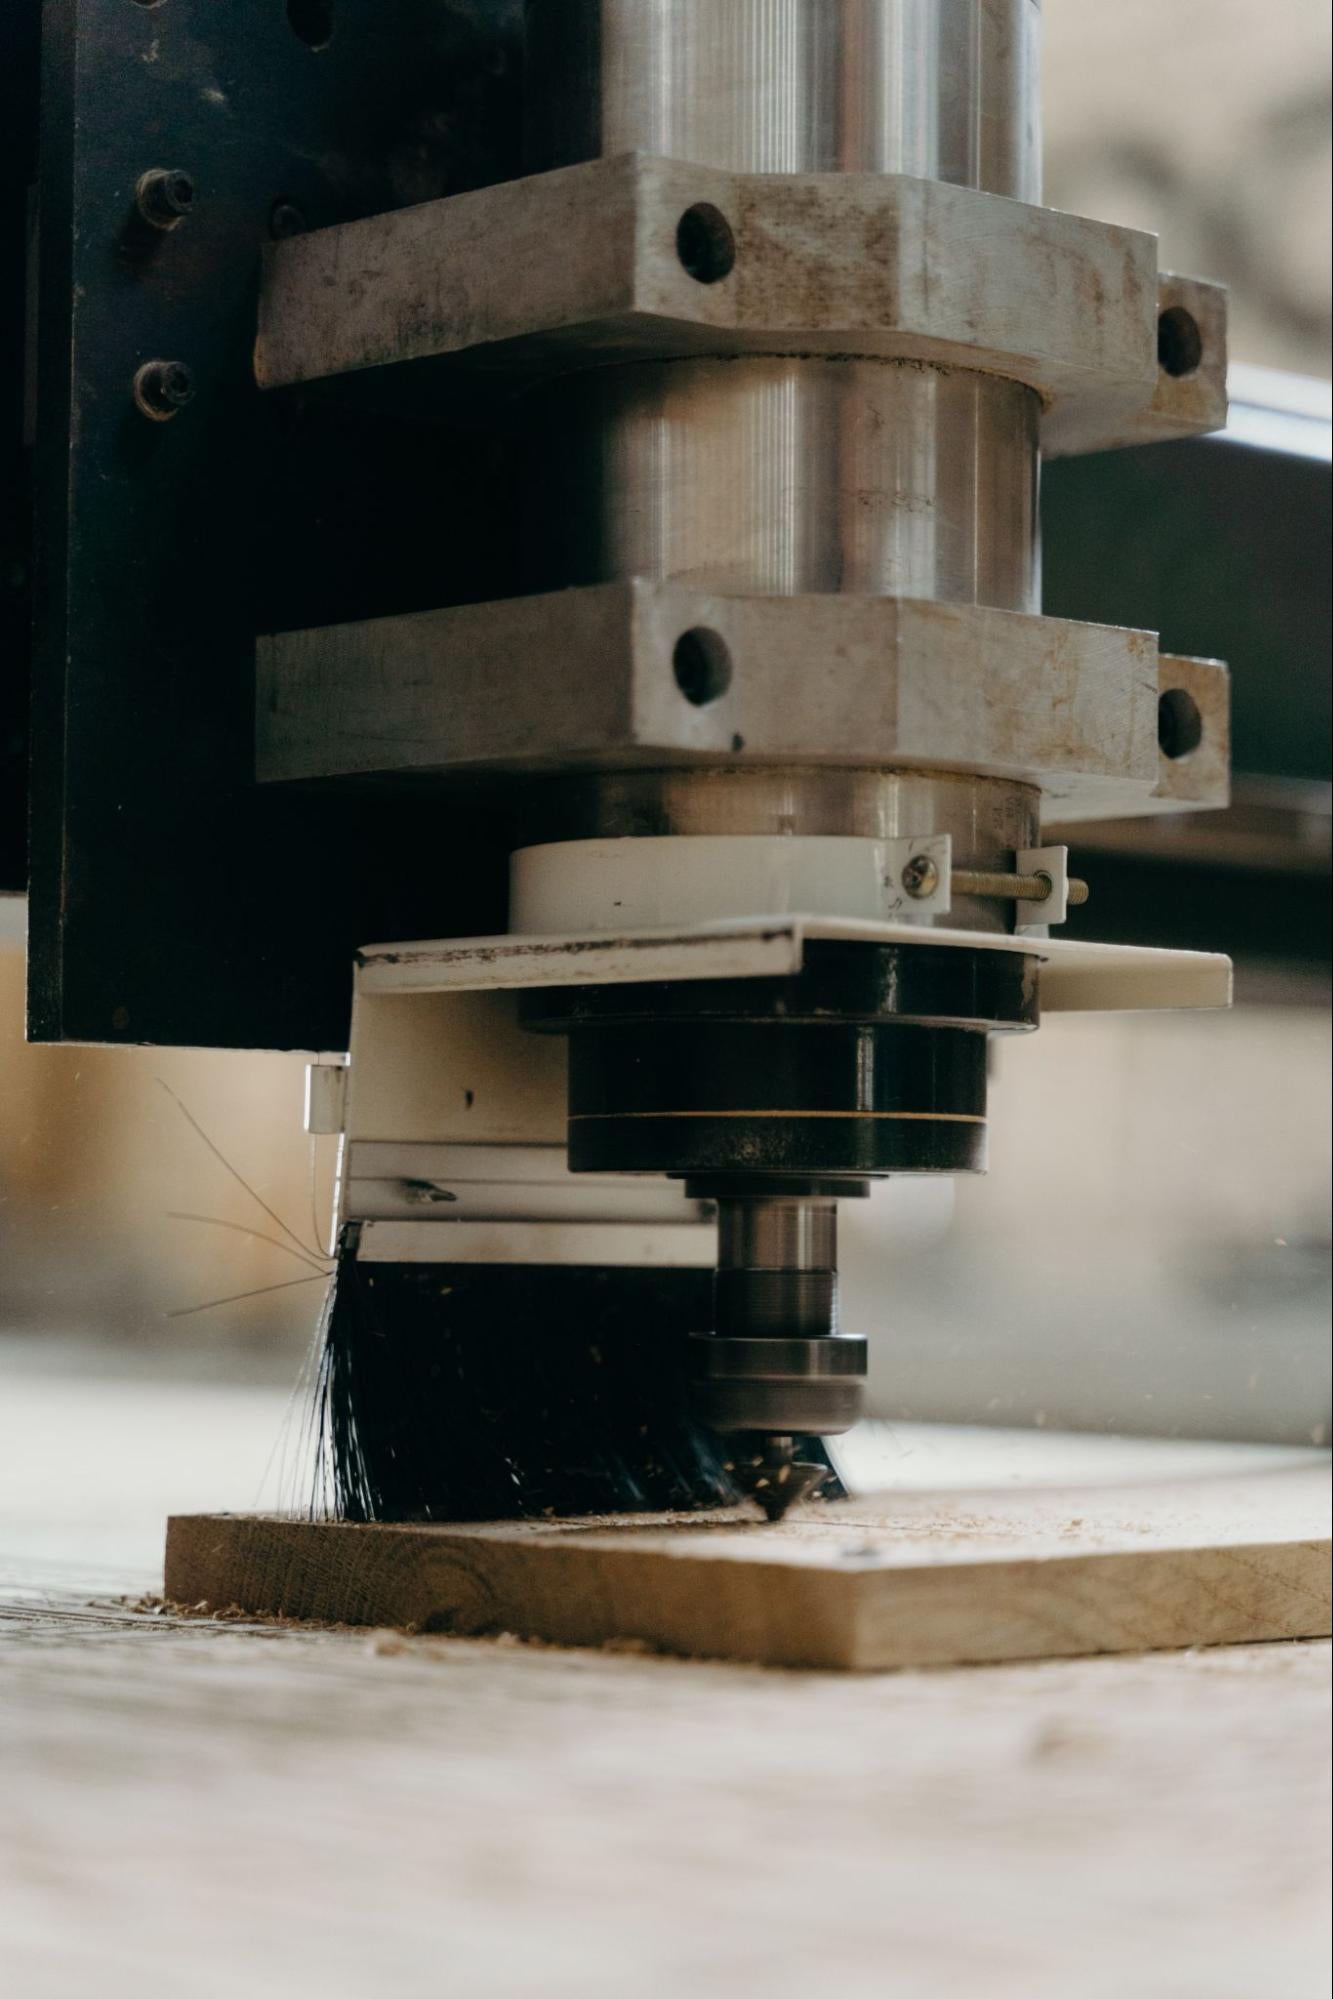 close-up-of-drill-attachment-on-cnc-router